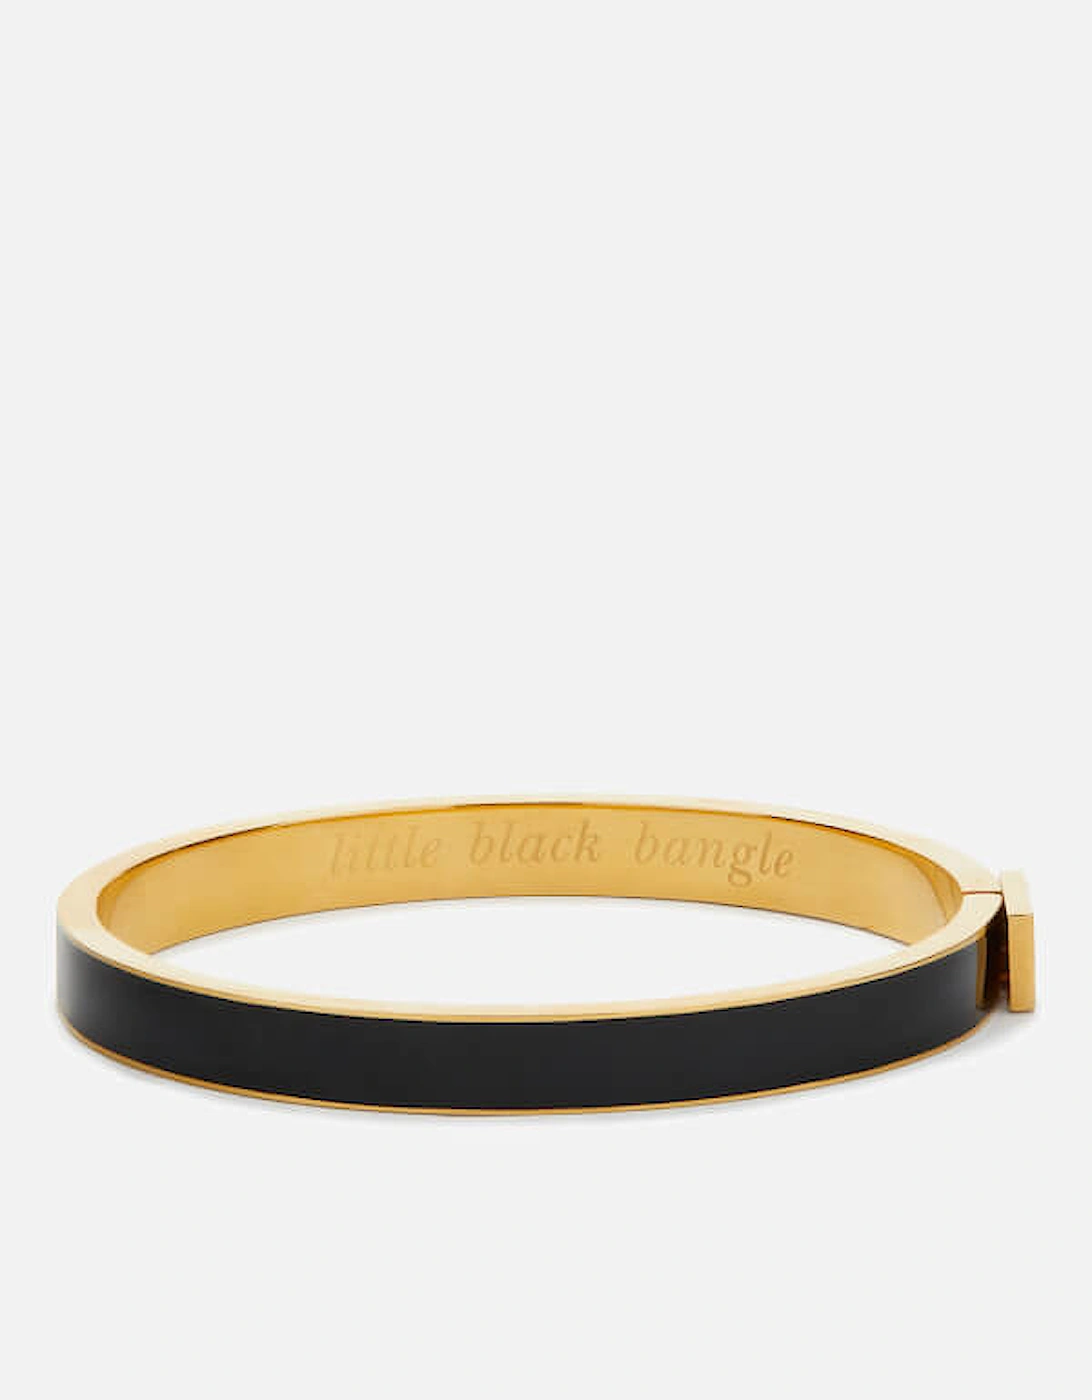 New York Idiom 'Little Black Bangle' Gold-Plated Bangles, 2 of 1